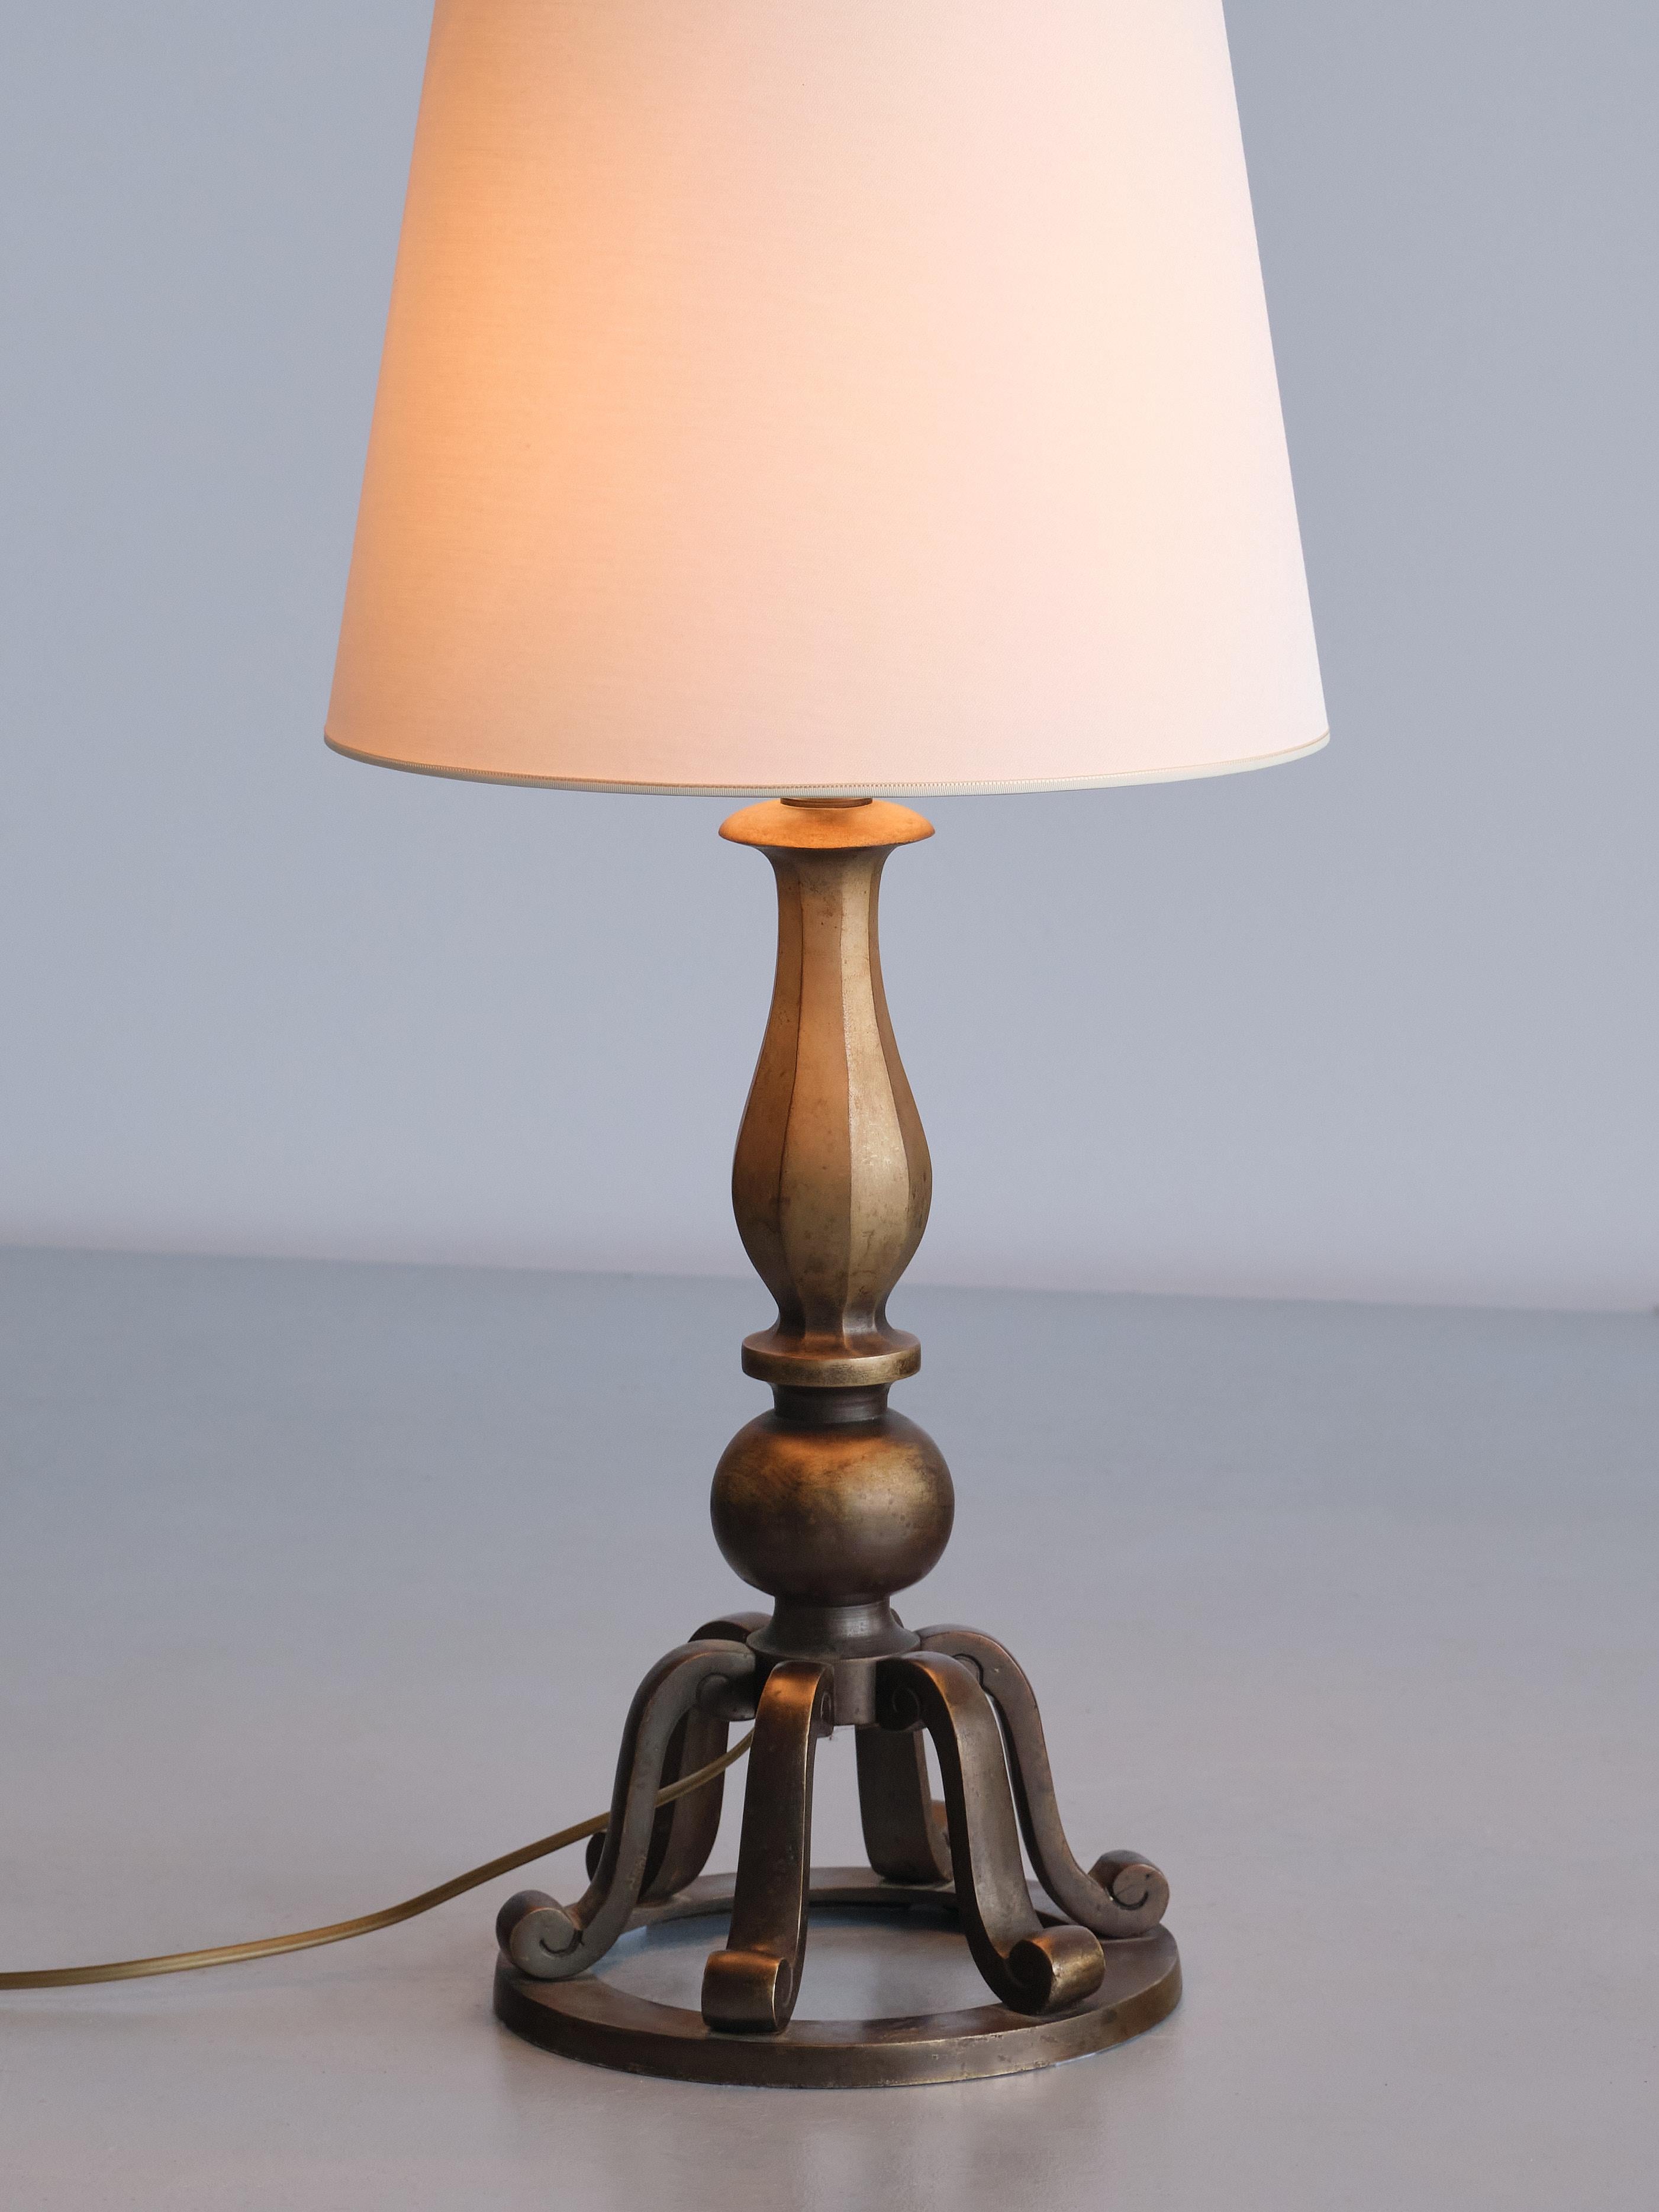 Mid-20th Century Swedish Grace Brass Table Lamp by C.G. Hallberg, Sweden, Early 1930s For Sale